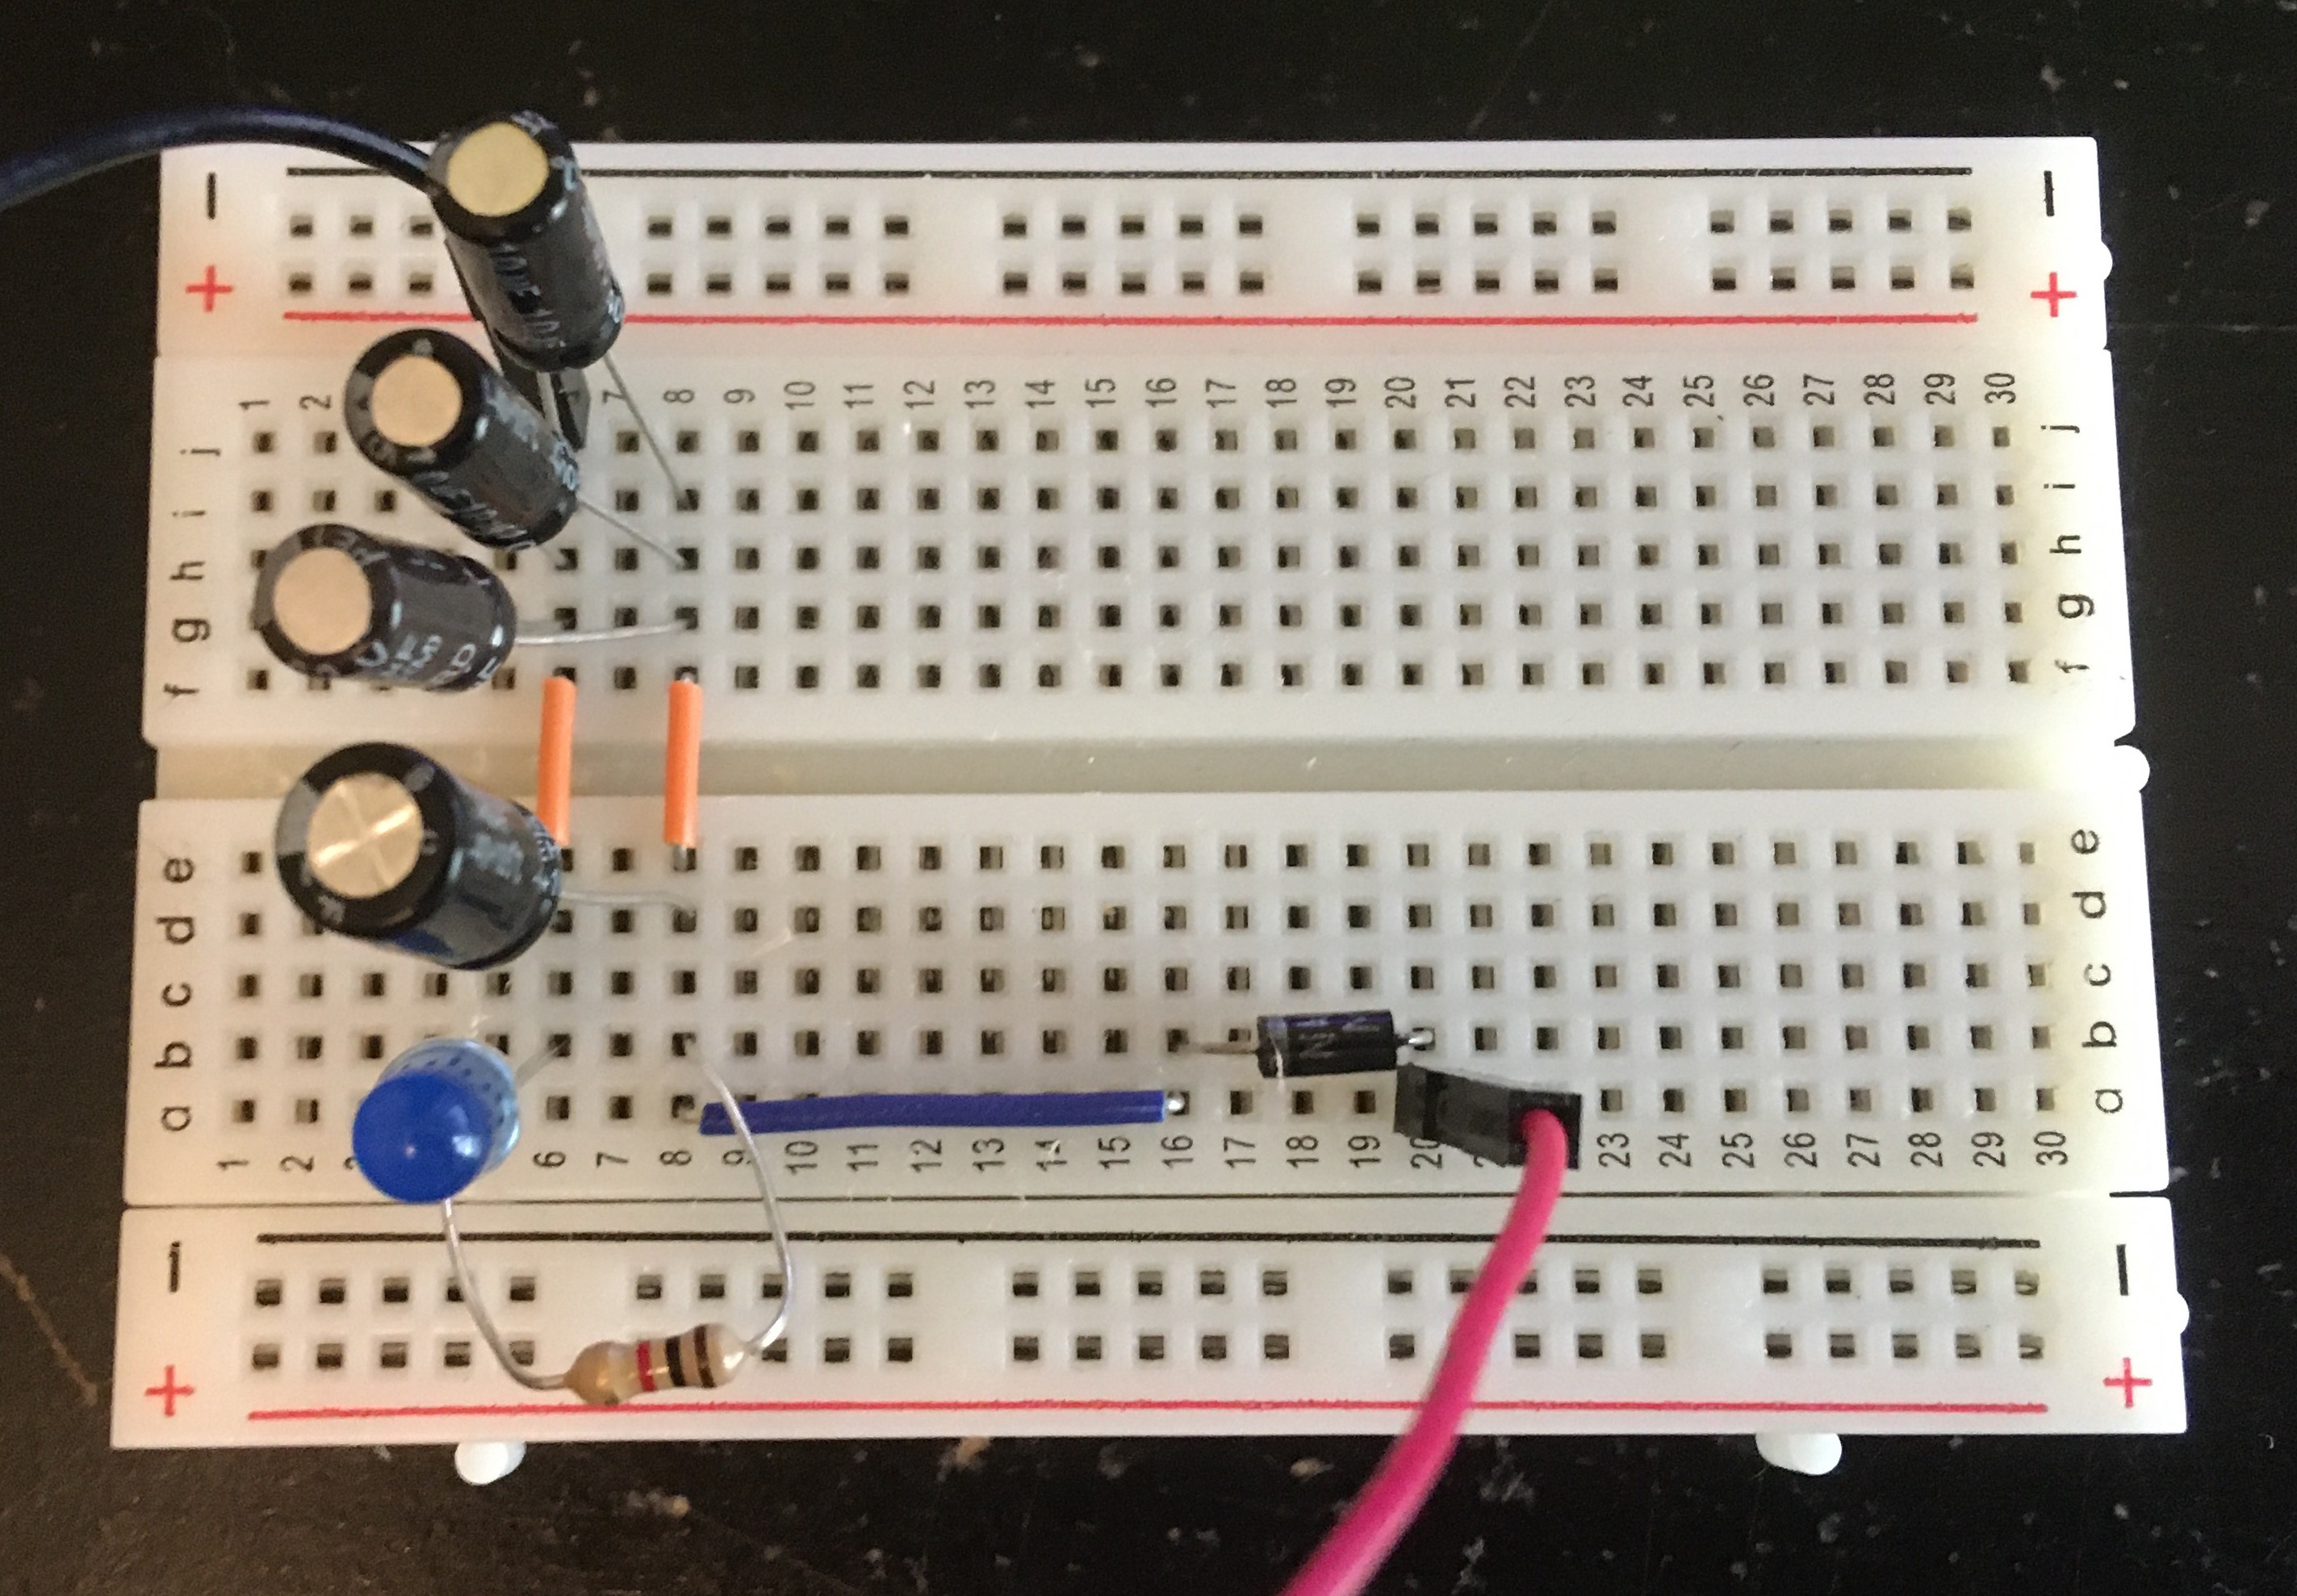 Circuits Components Arranged on Breadboard